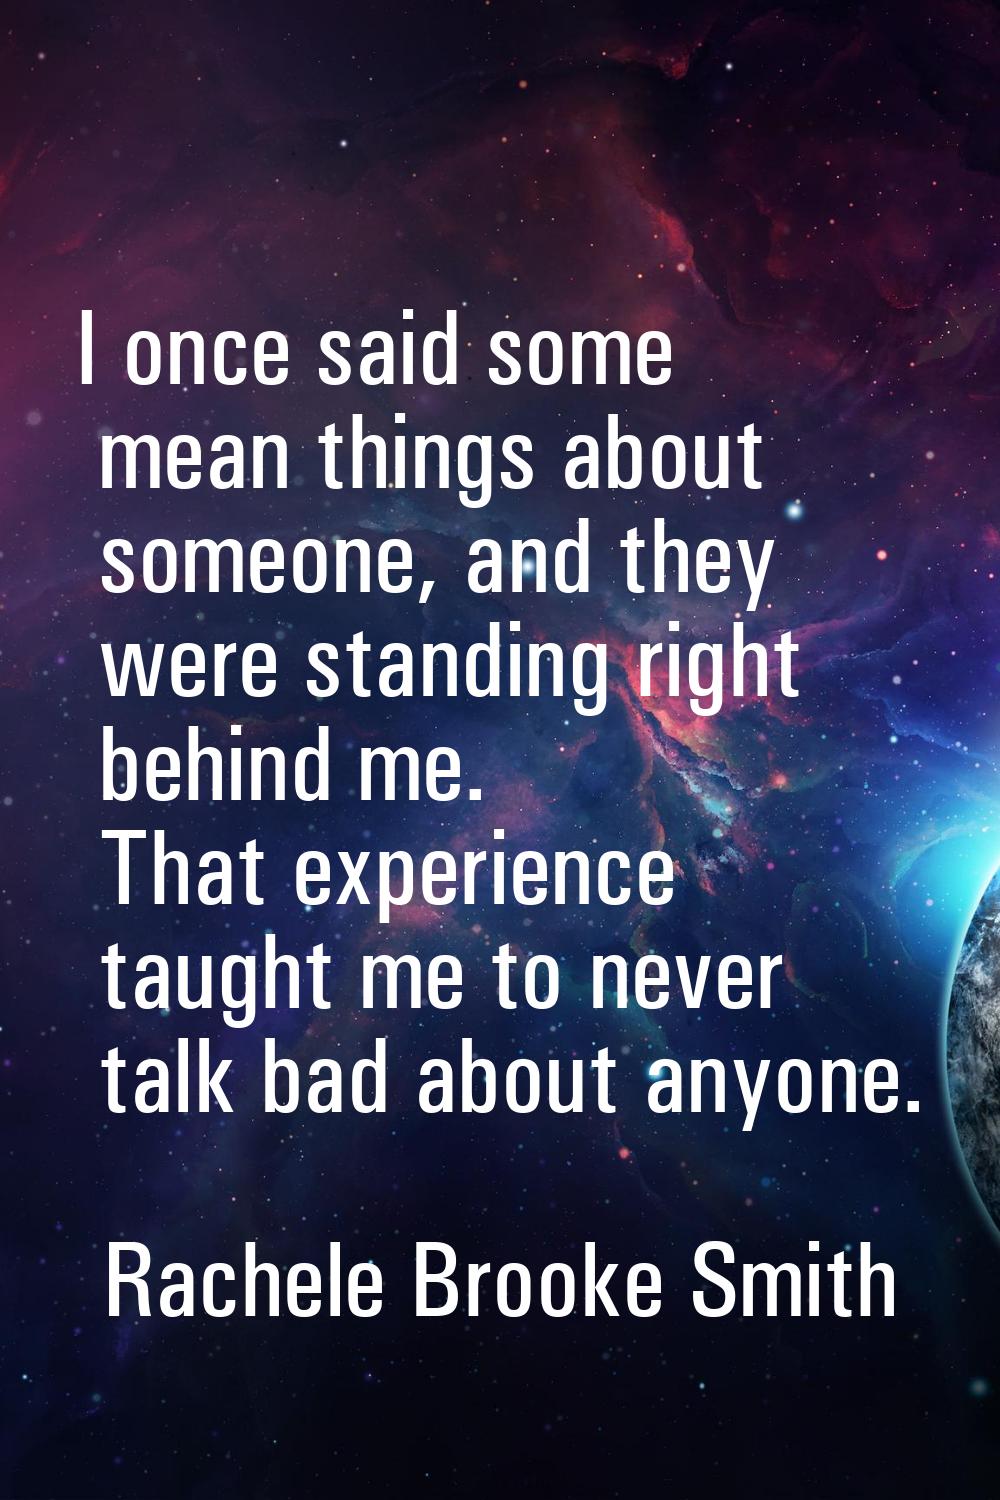 I once said some mean things about someone, and they were standing right behind me. That experience